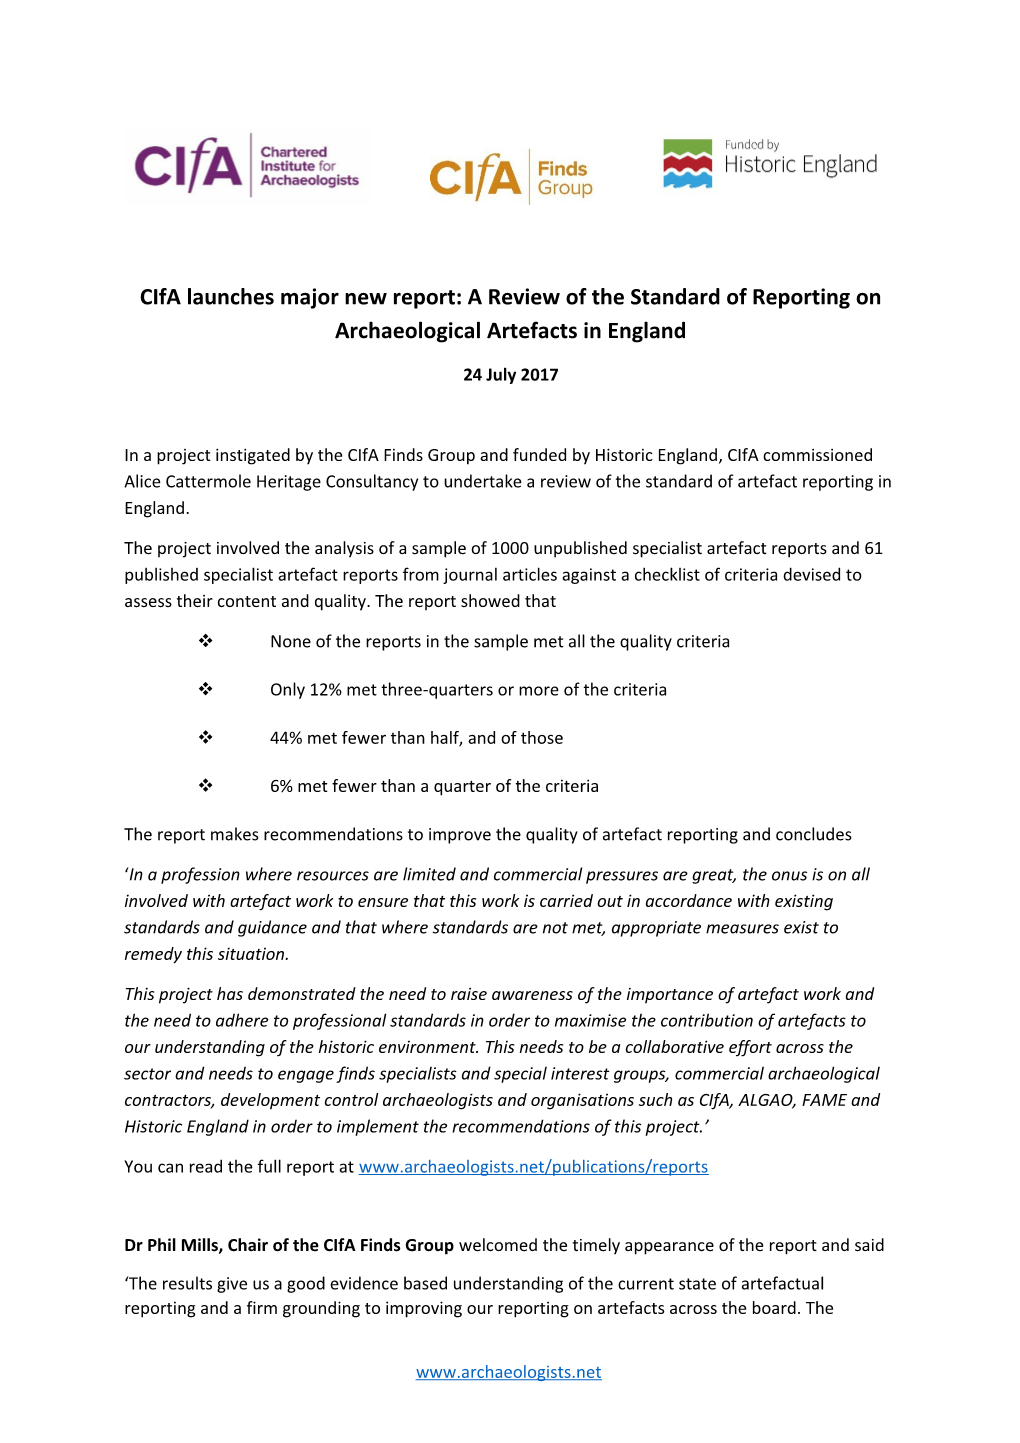 Cifa Launches Major New Report: a Review of the Standard of Reporting on Archaeological